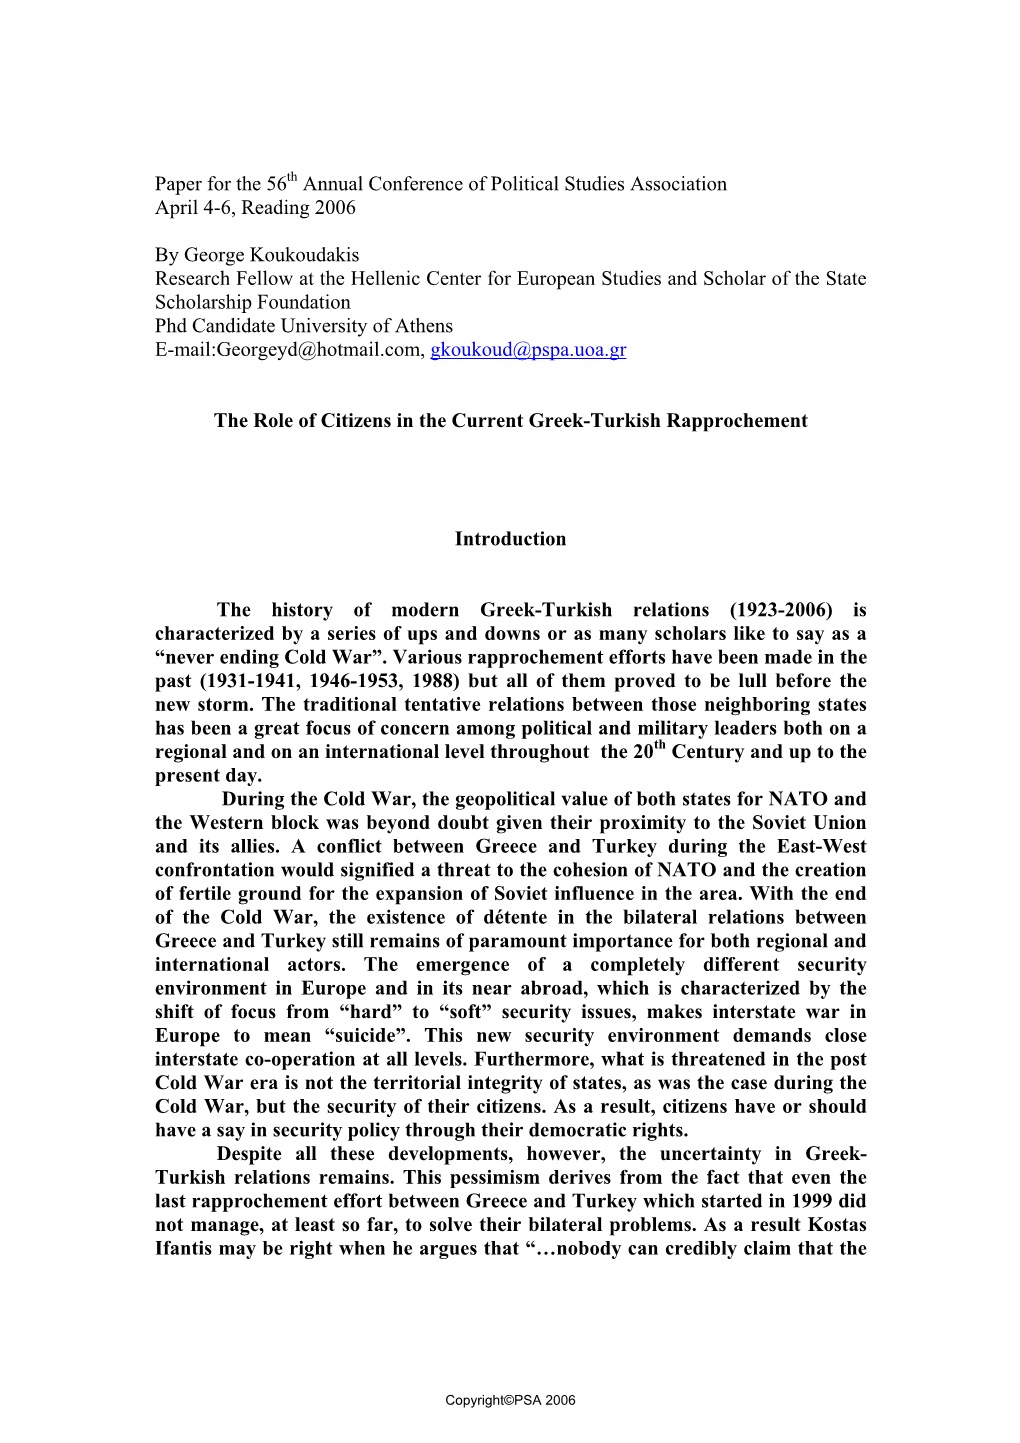 The Role of Citizens in the Current Greek-Turkish Rapprochement